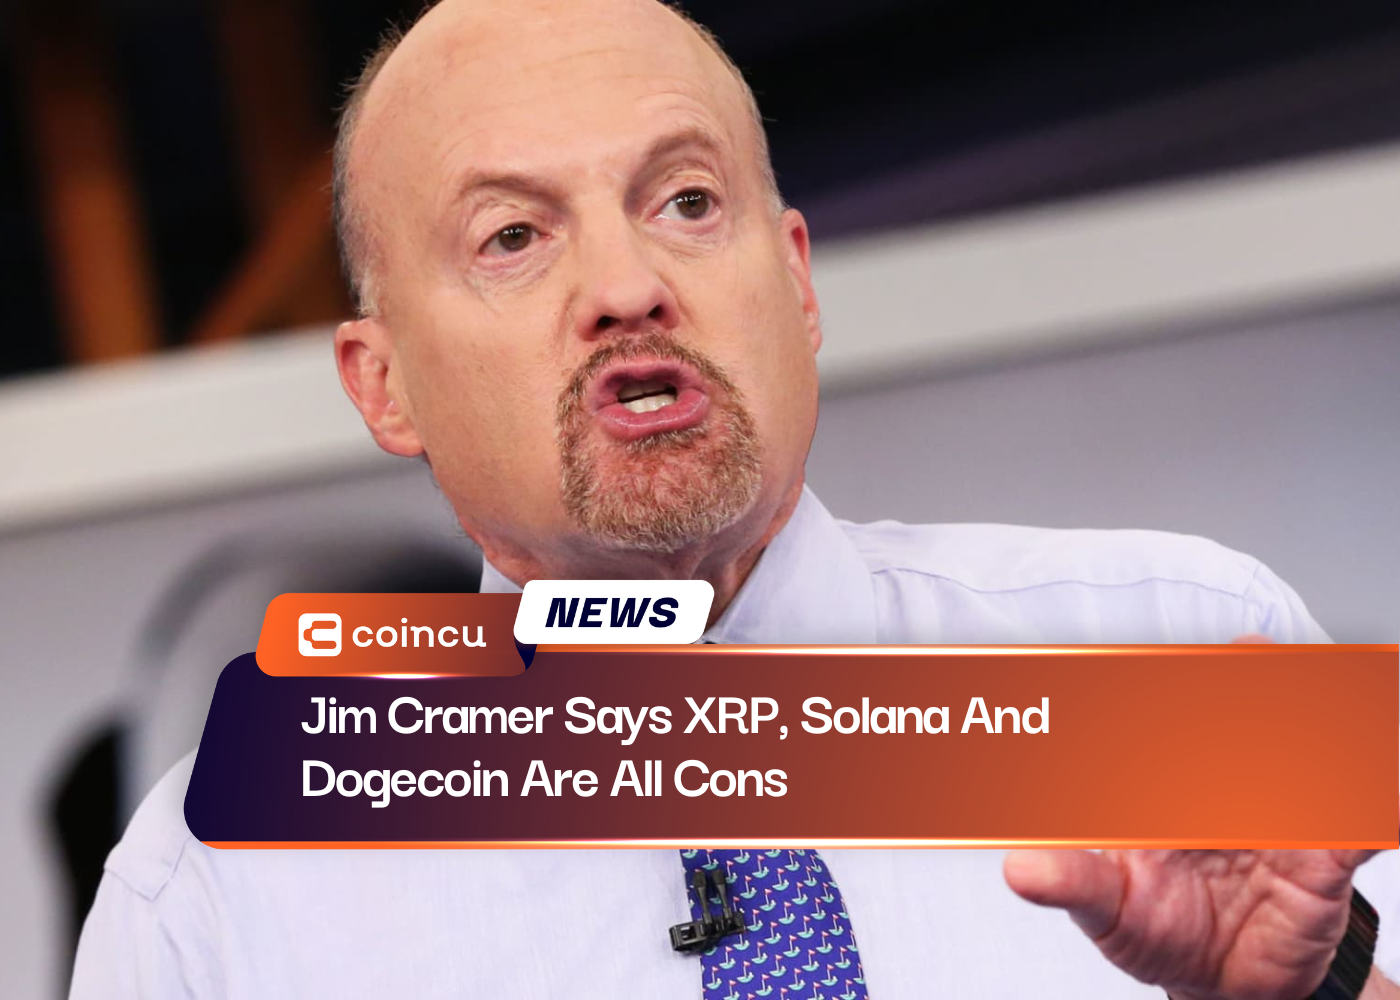 Jim Cramer Says XRP, Solana And Dogecoin Are All Cons